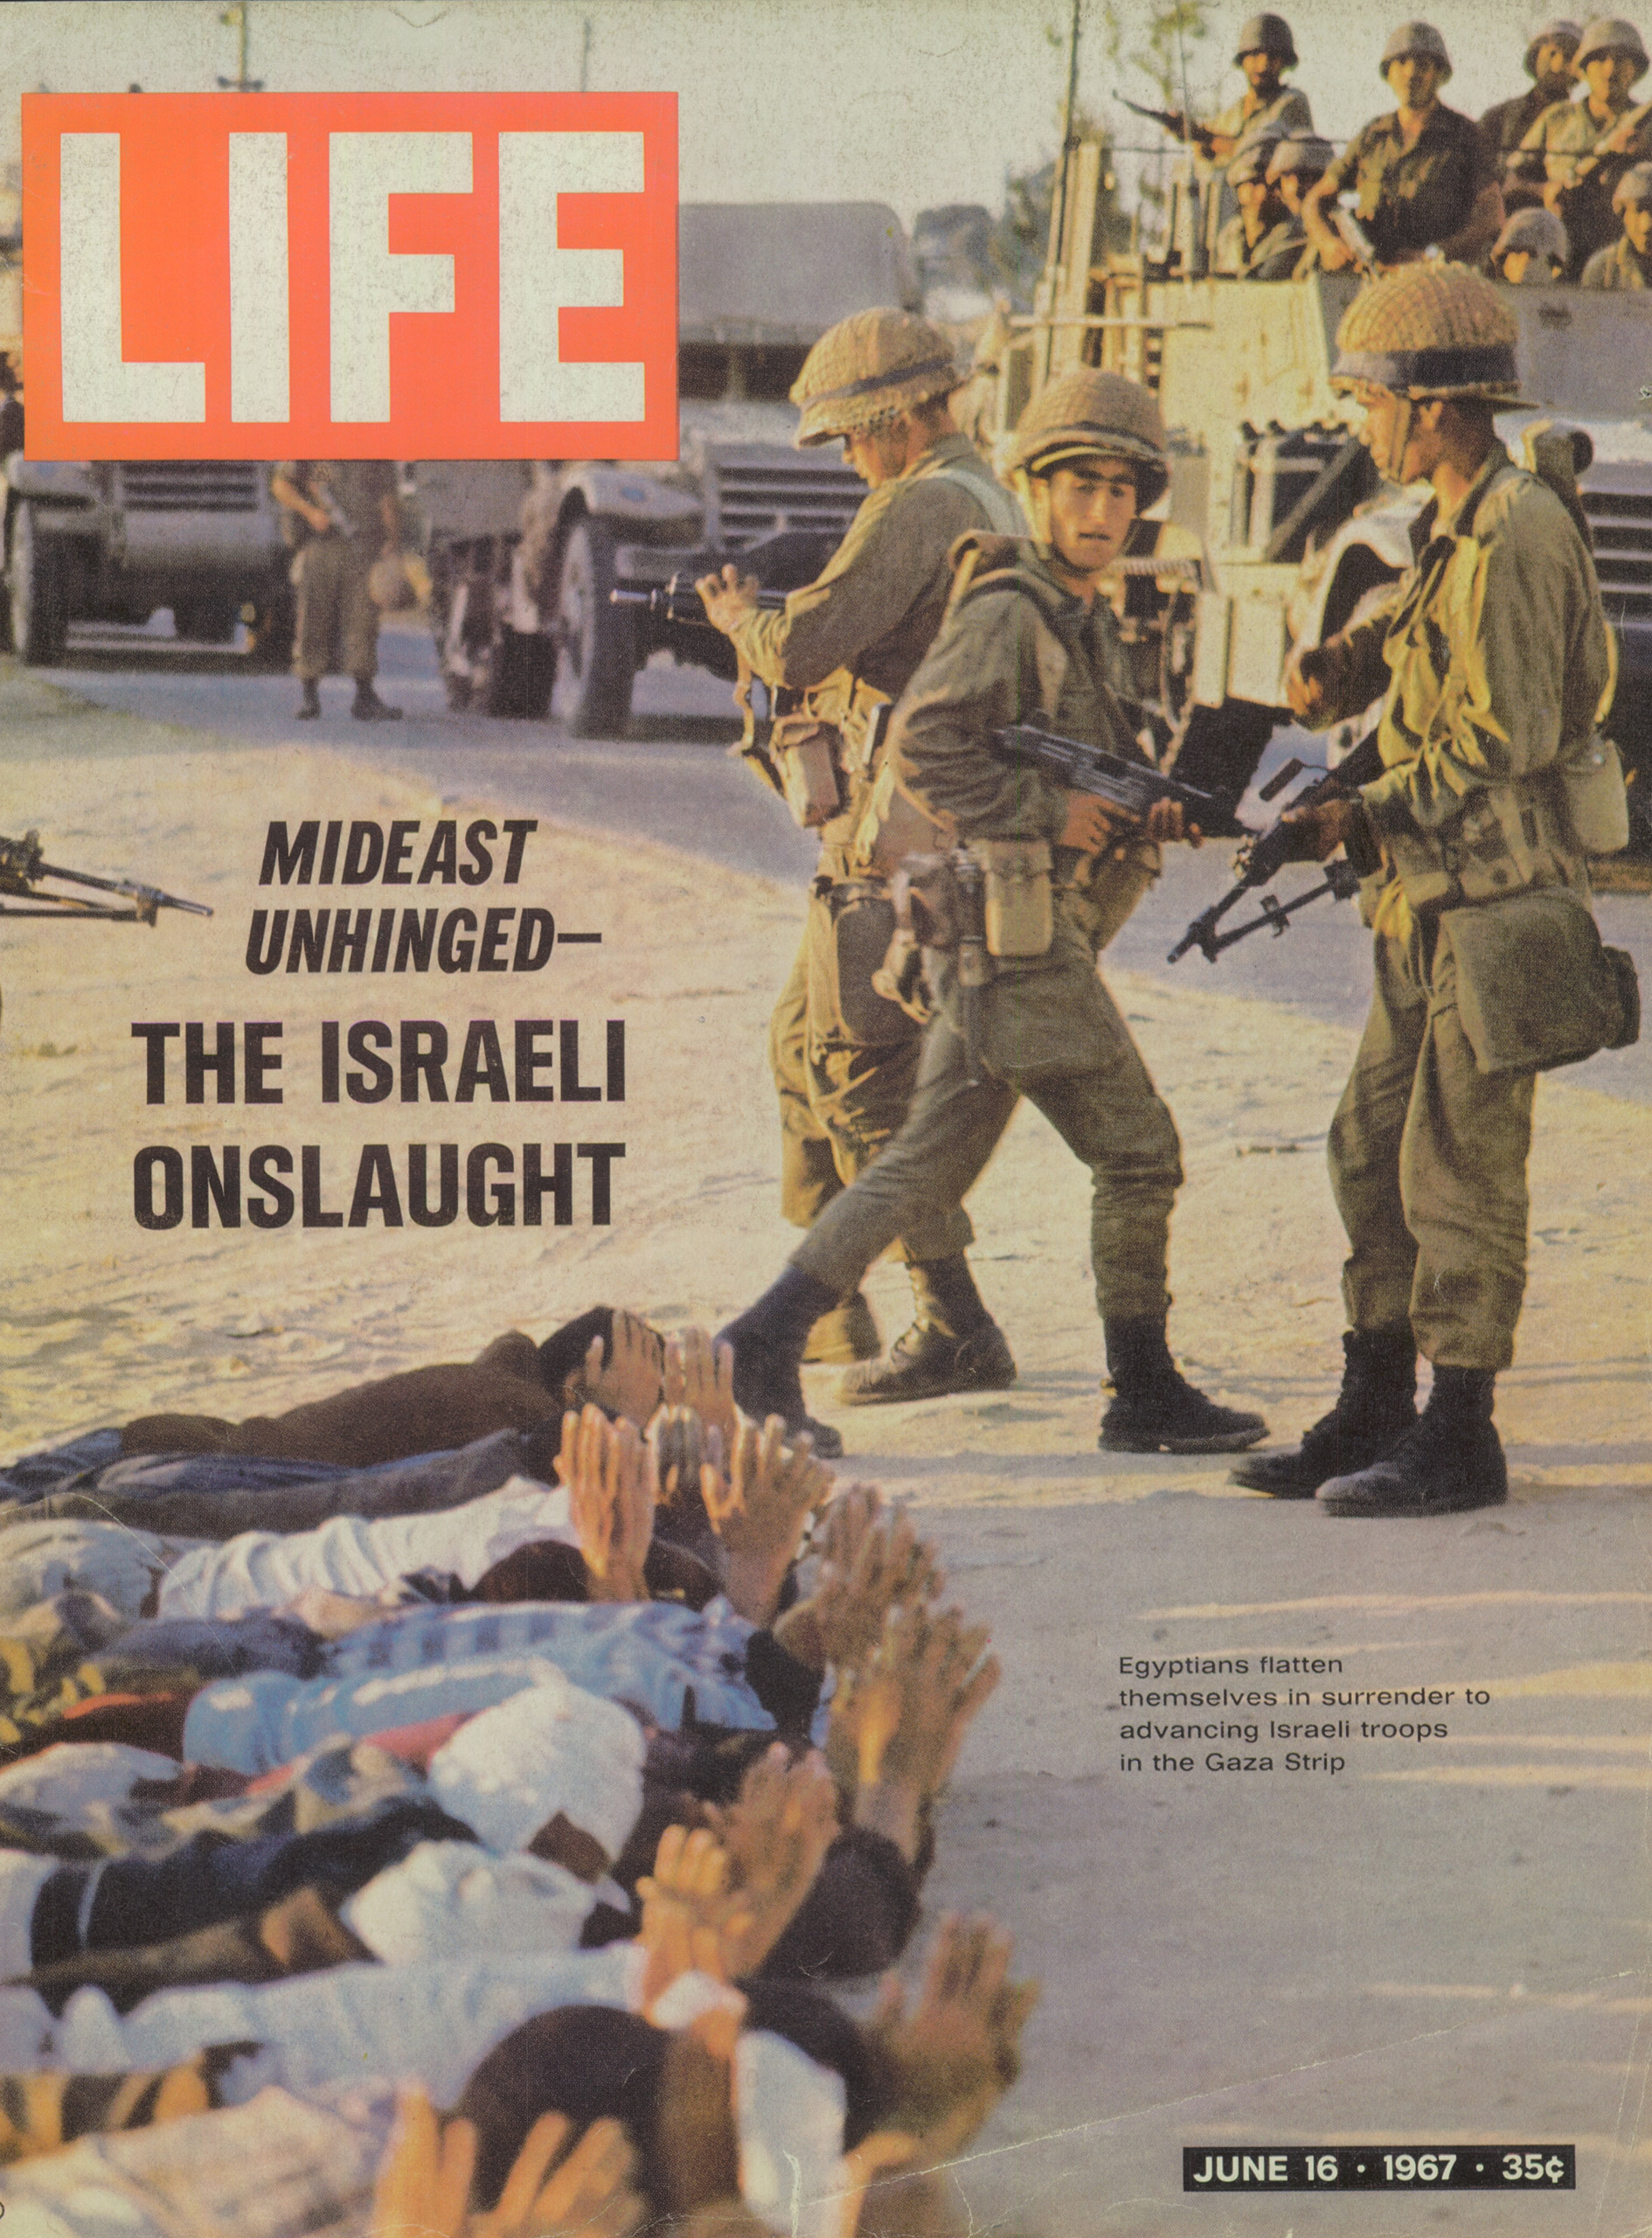 June 16, 1967 cover of LIFE magazine.